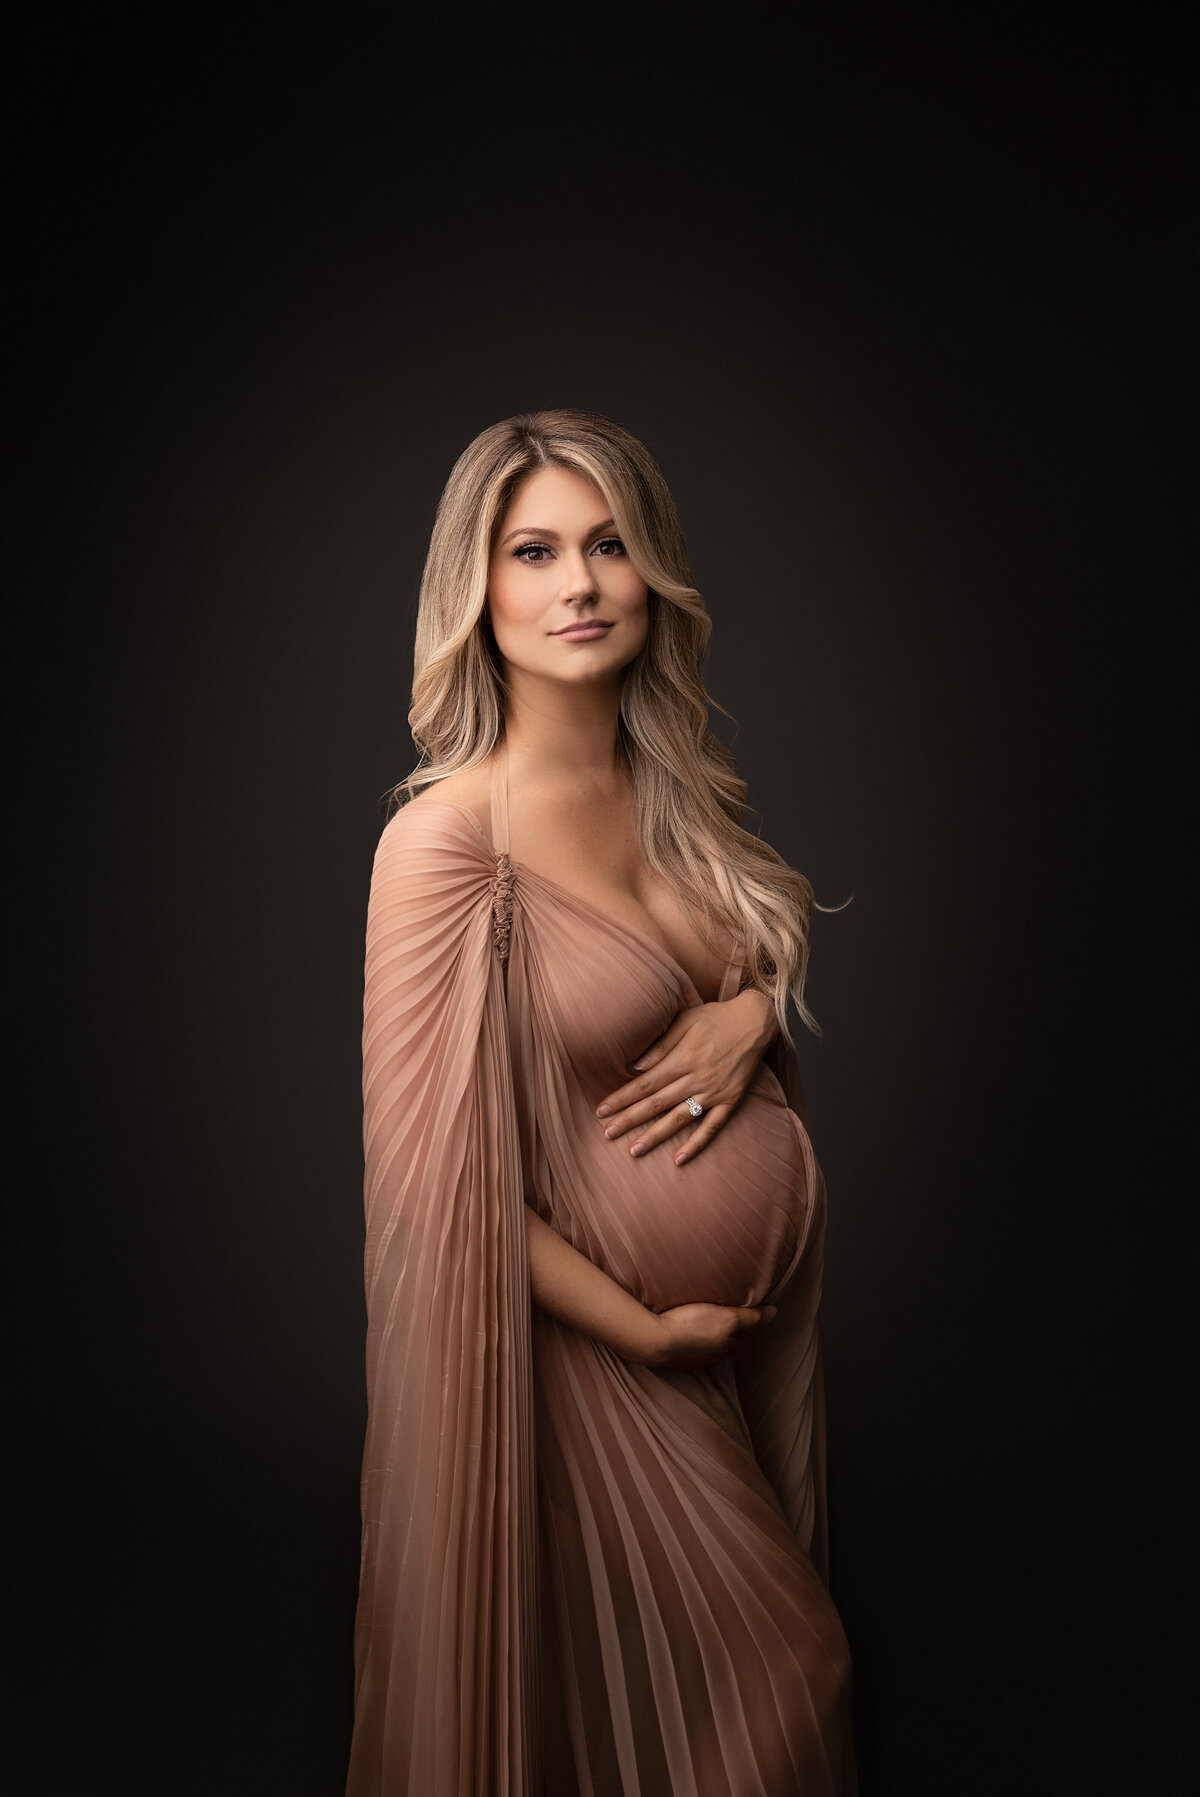 Philadelphia Main Line's best maternity photographer Katie Marshall captures expectant mom for a fine art maternity photoshoot. Expectant mom in a floor length dusty rose maternity photoshoot gown with floor-length caped sleeves is angled away from the camera with one hand under and the other touching the top of her baby bump. Her blonde, wavy hair cascades over her back shoulder. She is looking at the camera with a closed-mouth smile.